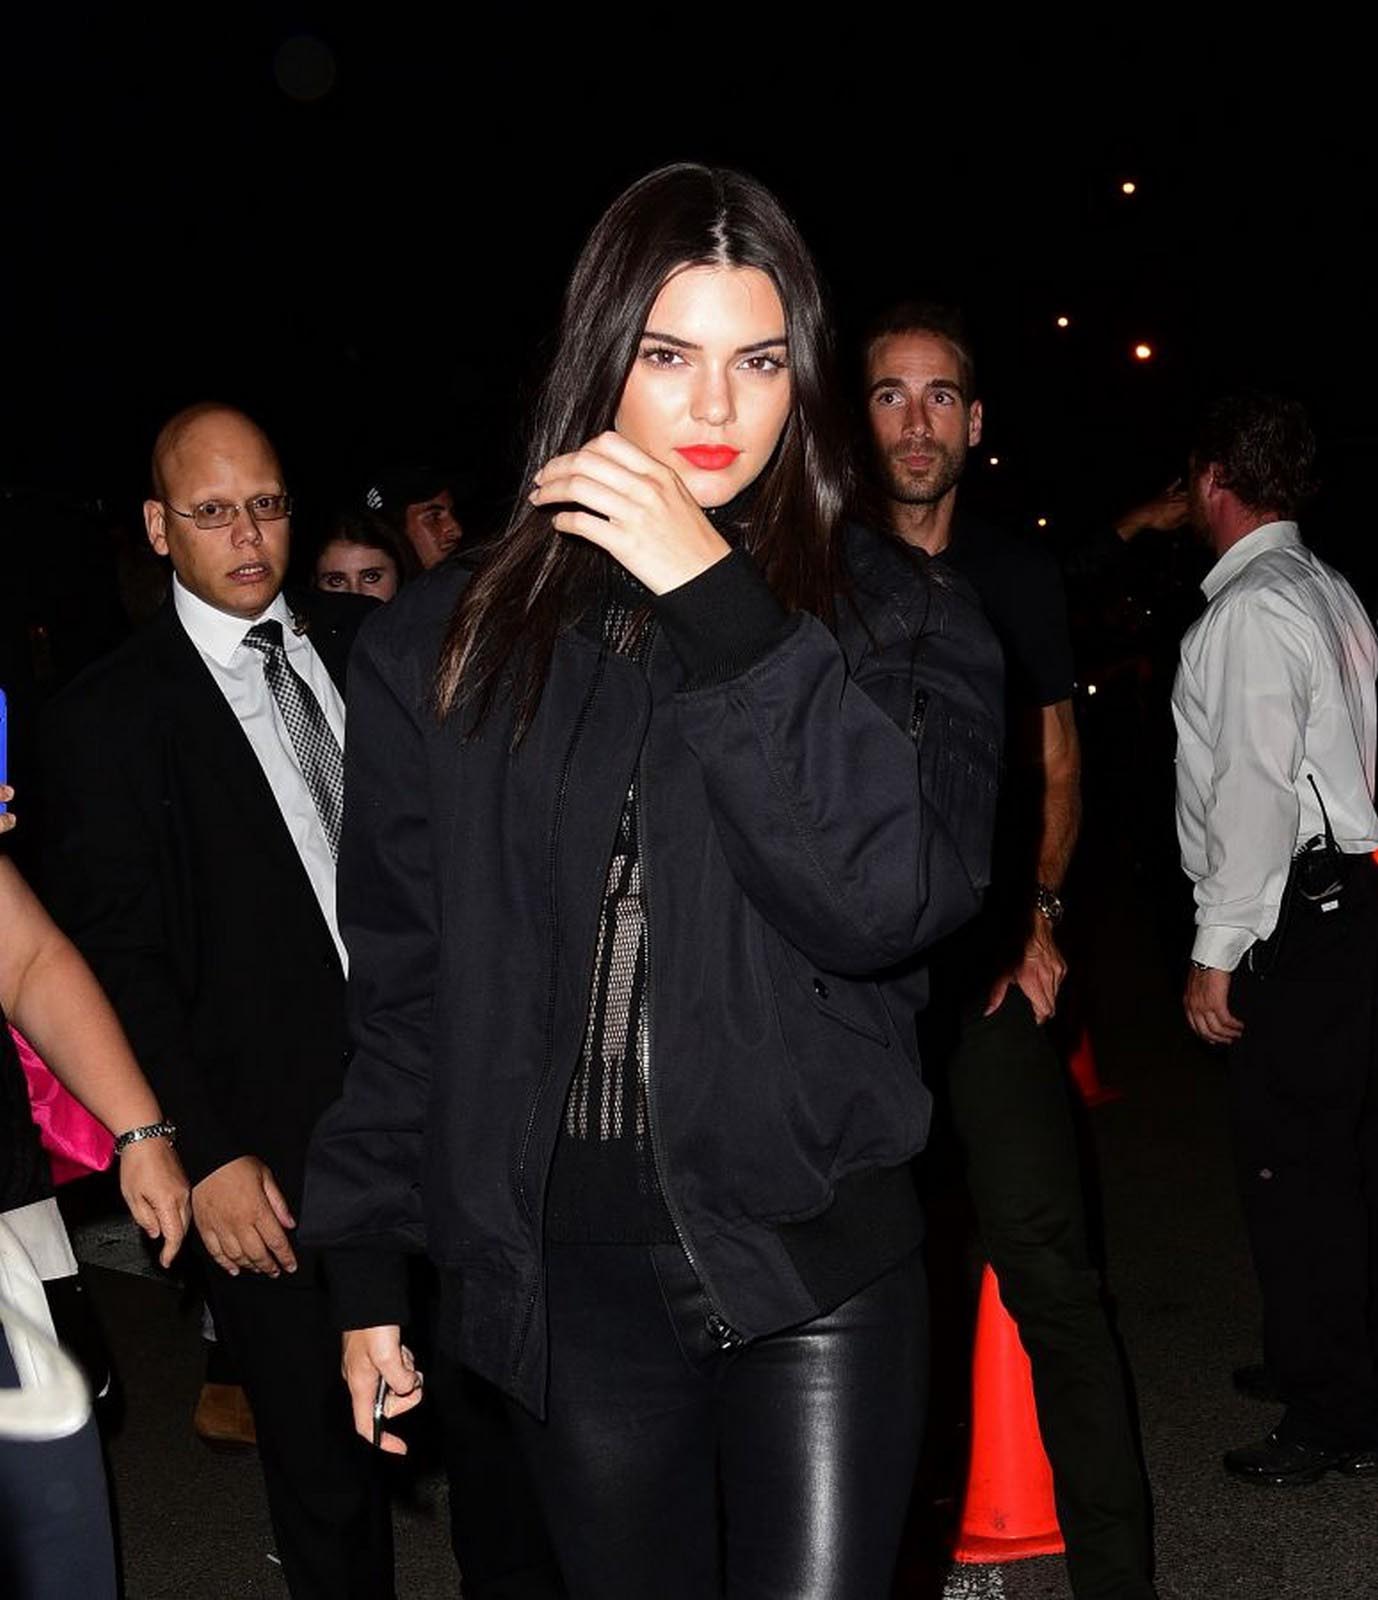 Kendall Jenner Photo Gallery 035b | Kendall Jenner Fans Site